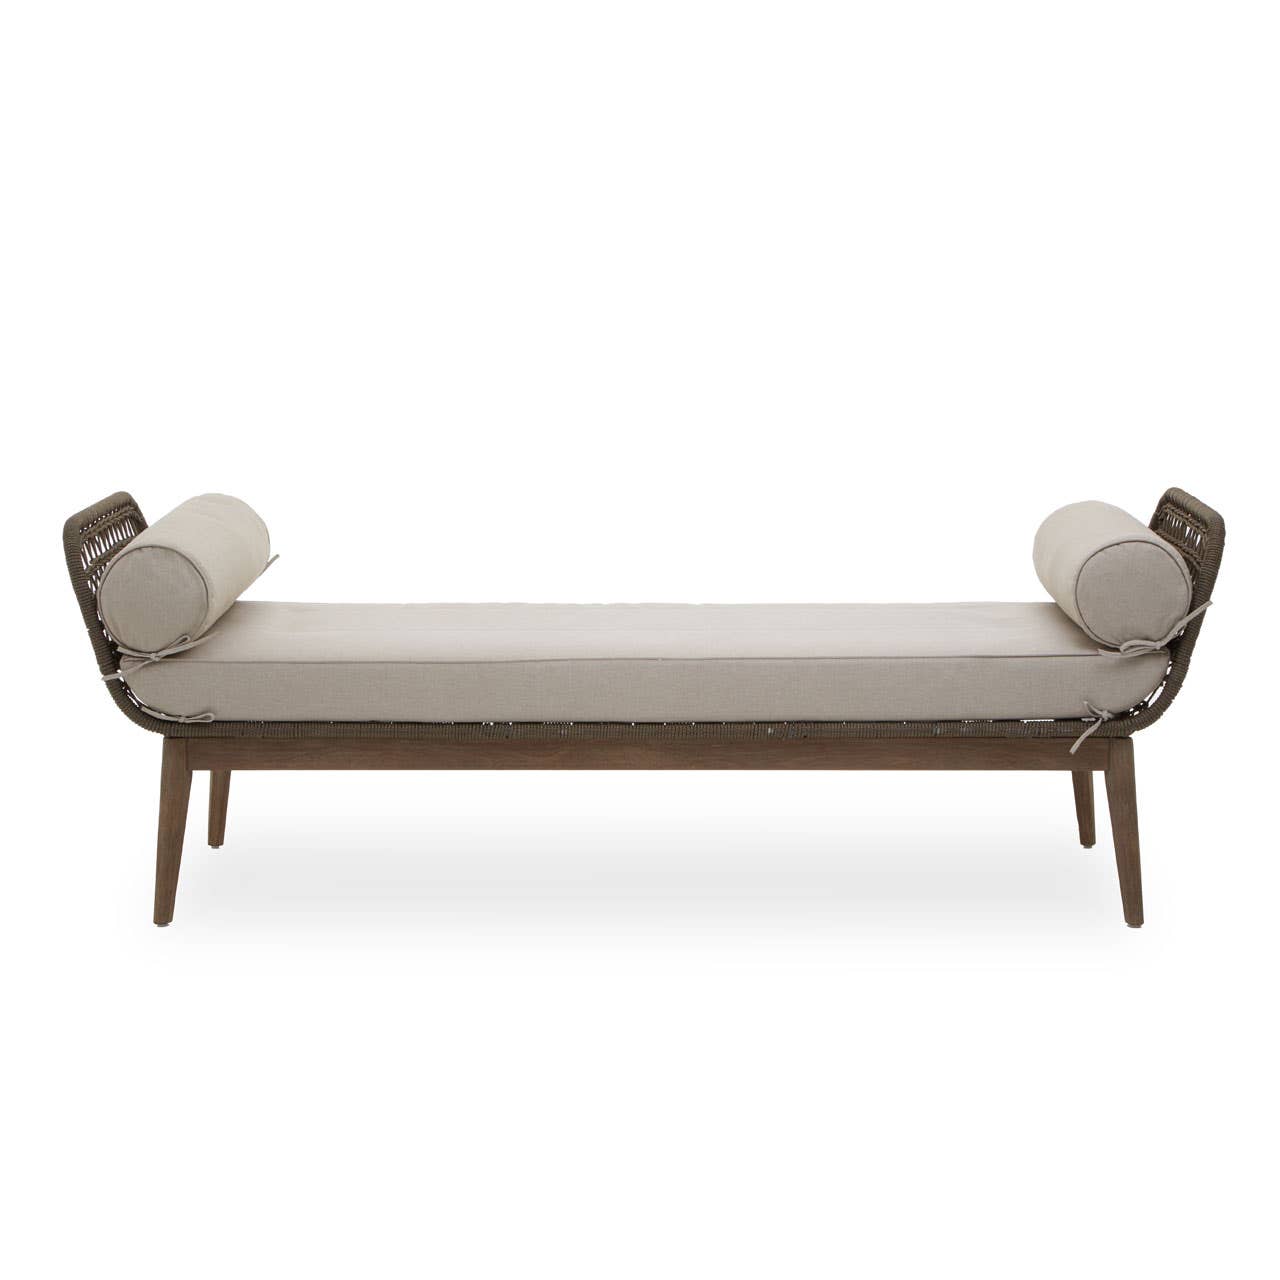 Opus Day Bed